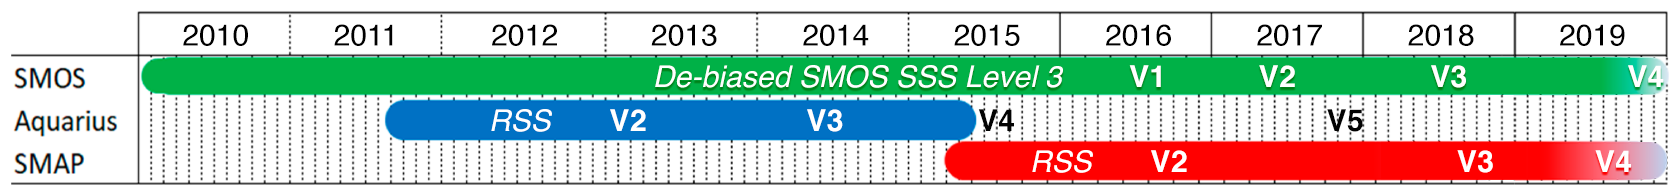 Timeline of major release dates for three examples of SSS data products